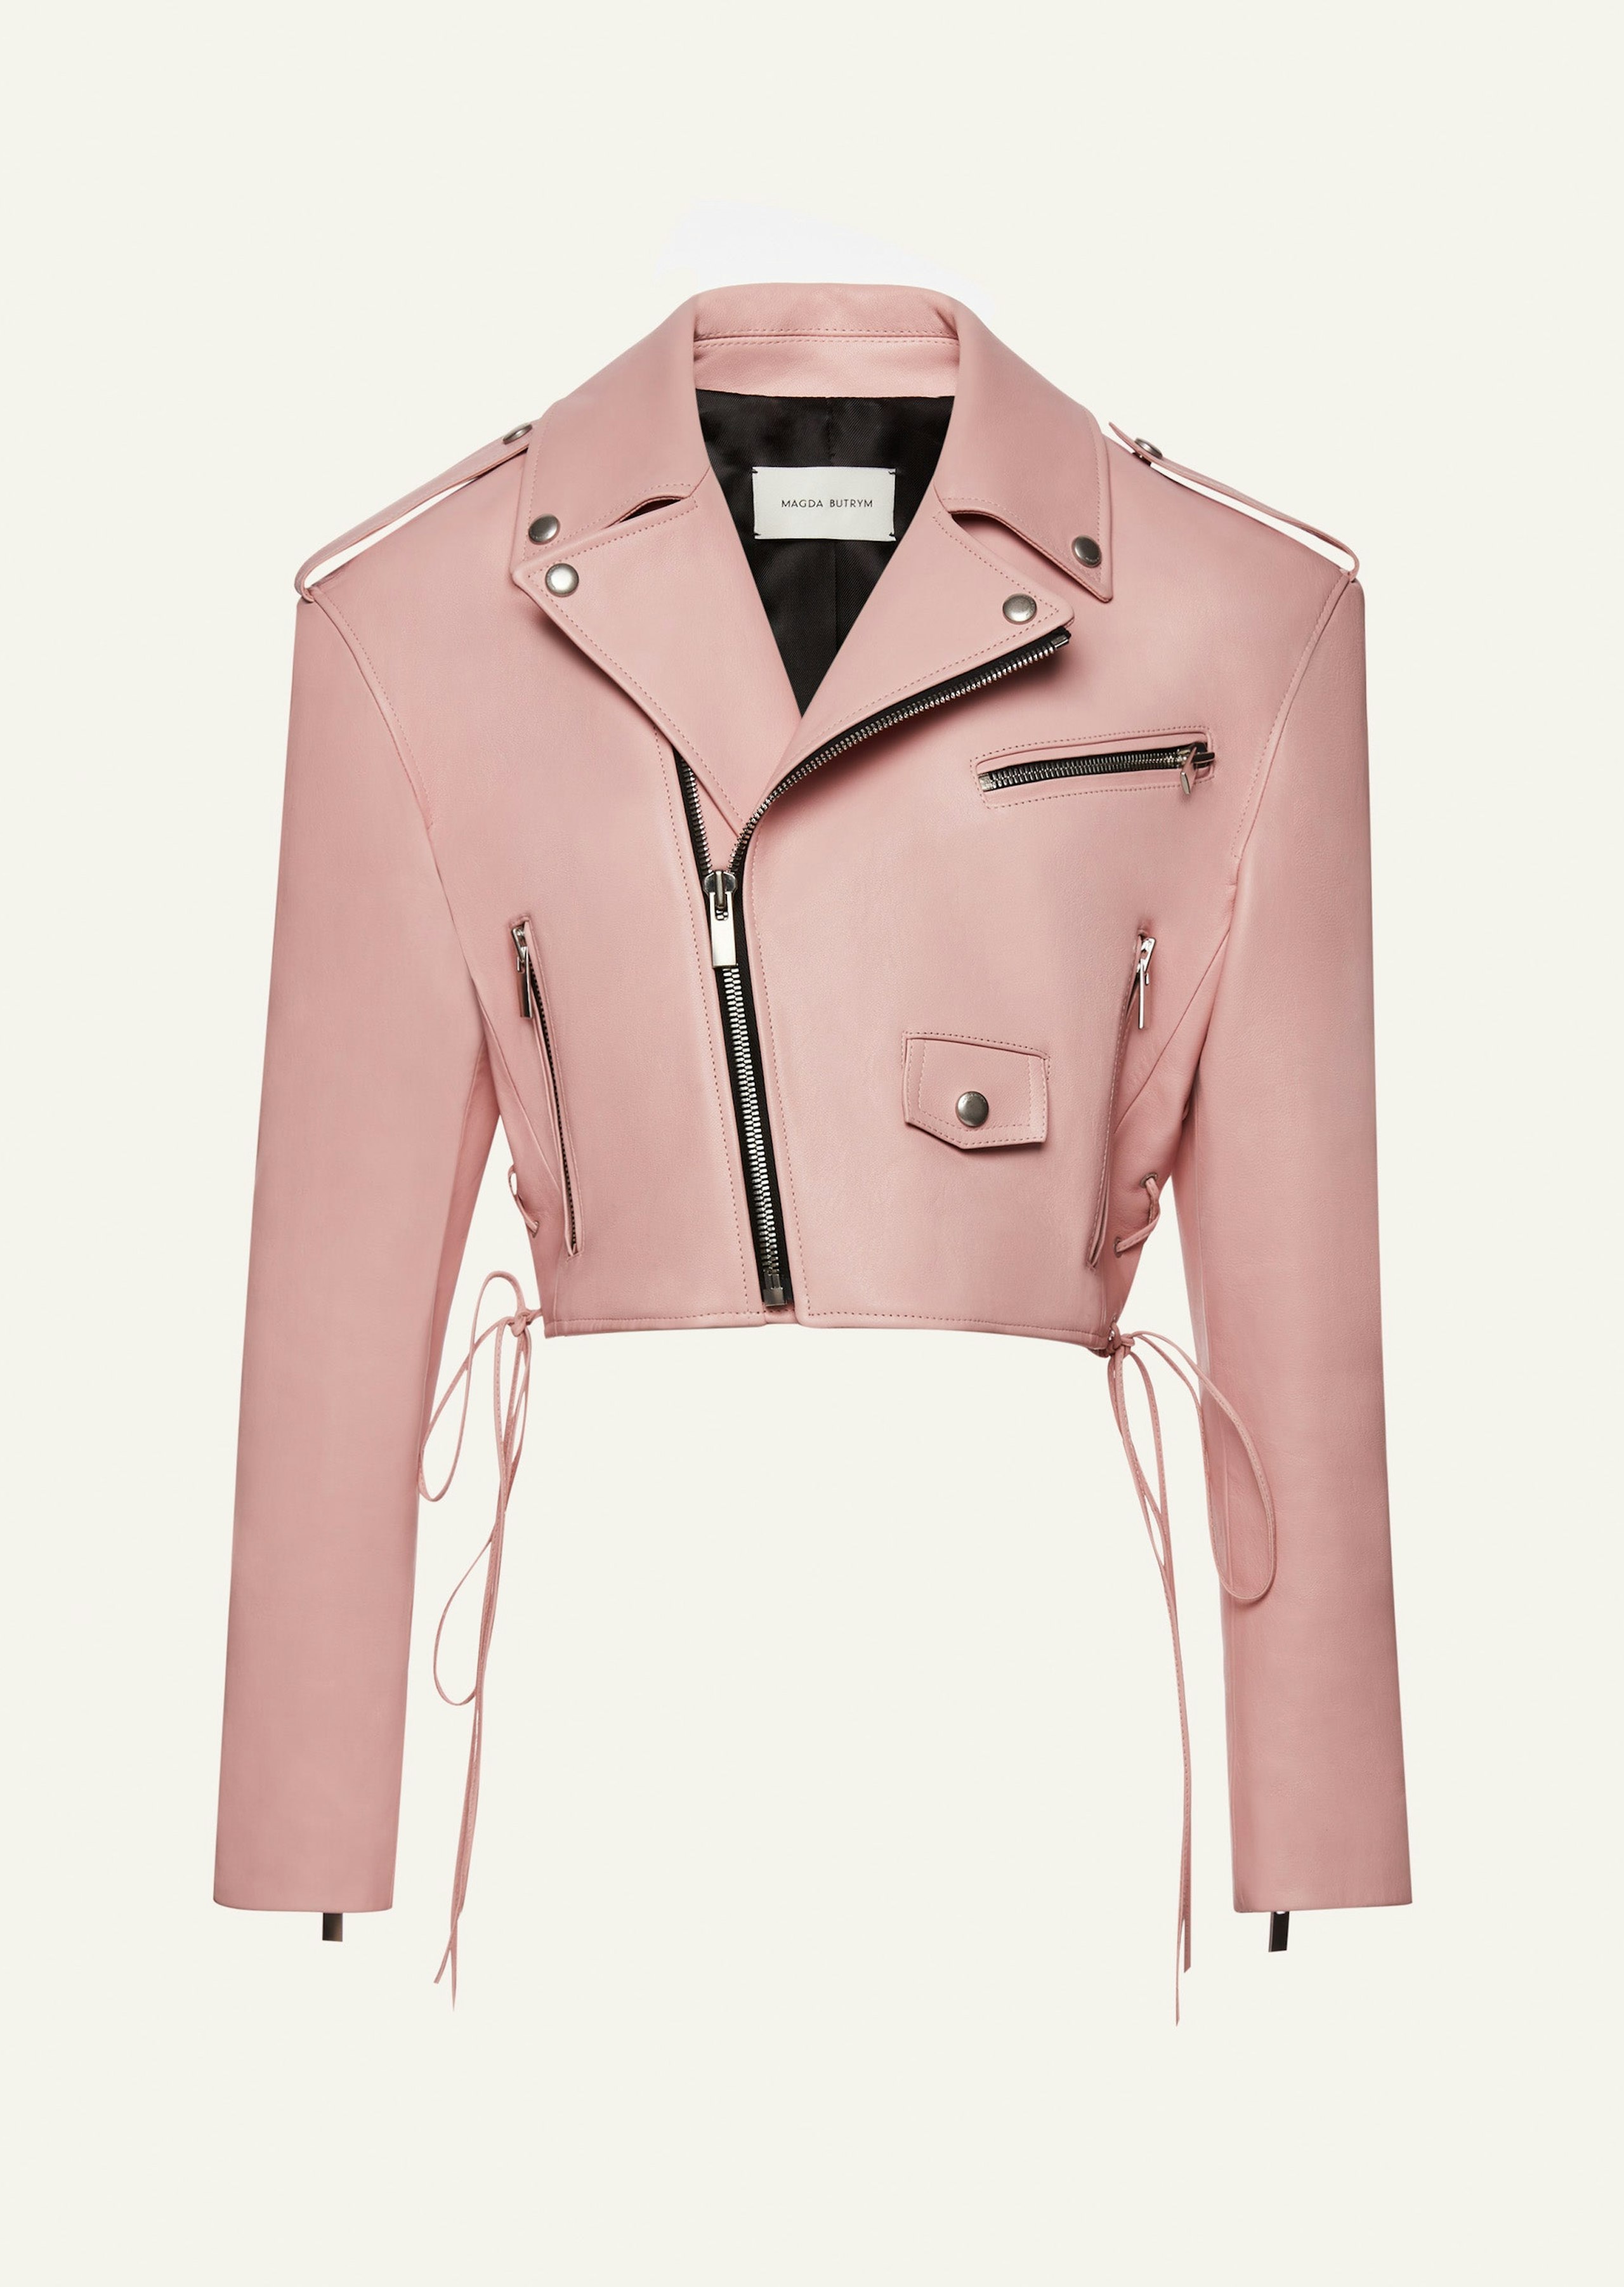 RE23 LEATHER 03 JACKET PINK